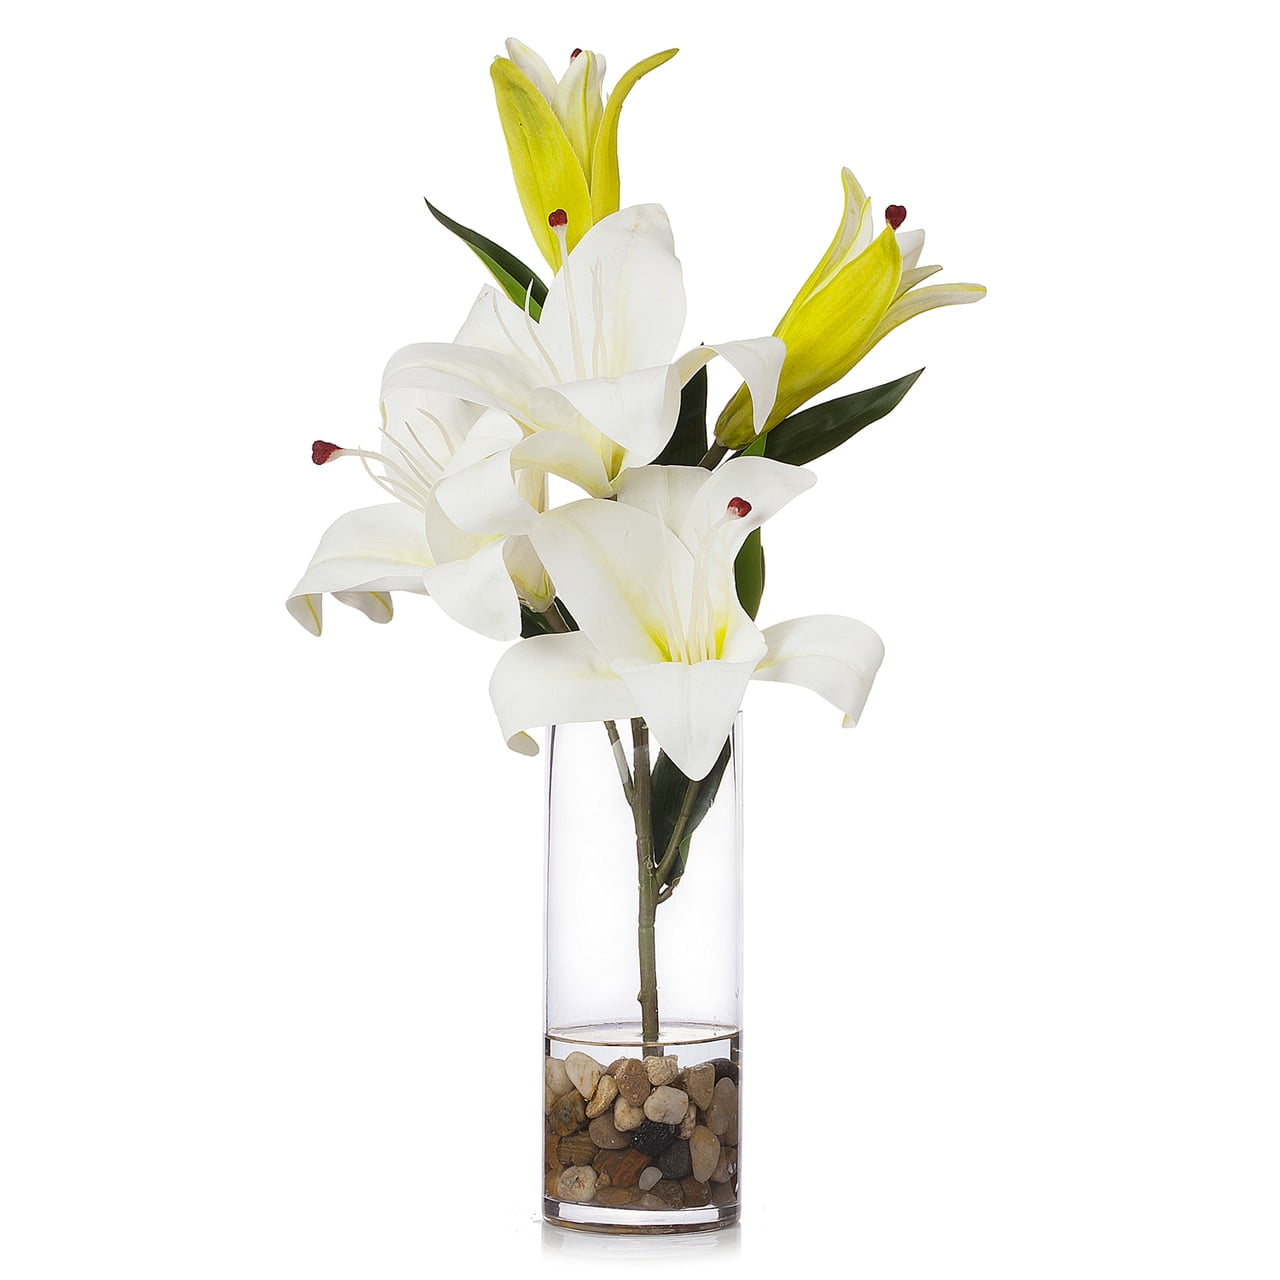 Cream Enova Home 3 Large Heads Artificial Real Touch Lilies Flower Arrangement in Glass Vase with Faux Water for Home Decoration